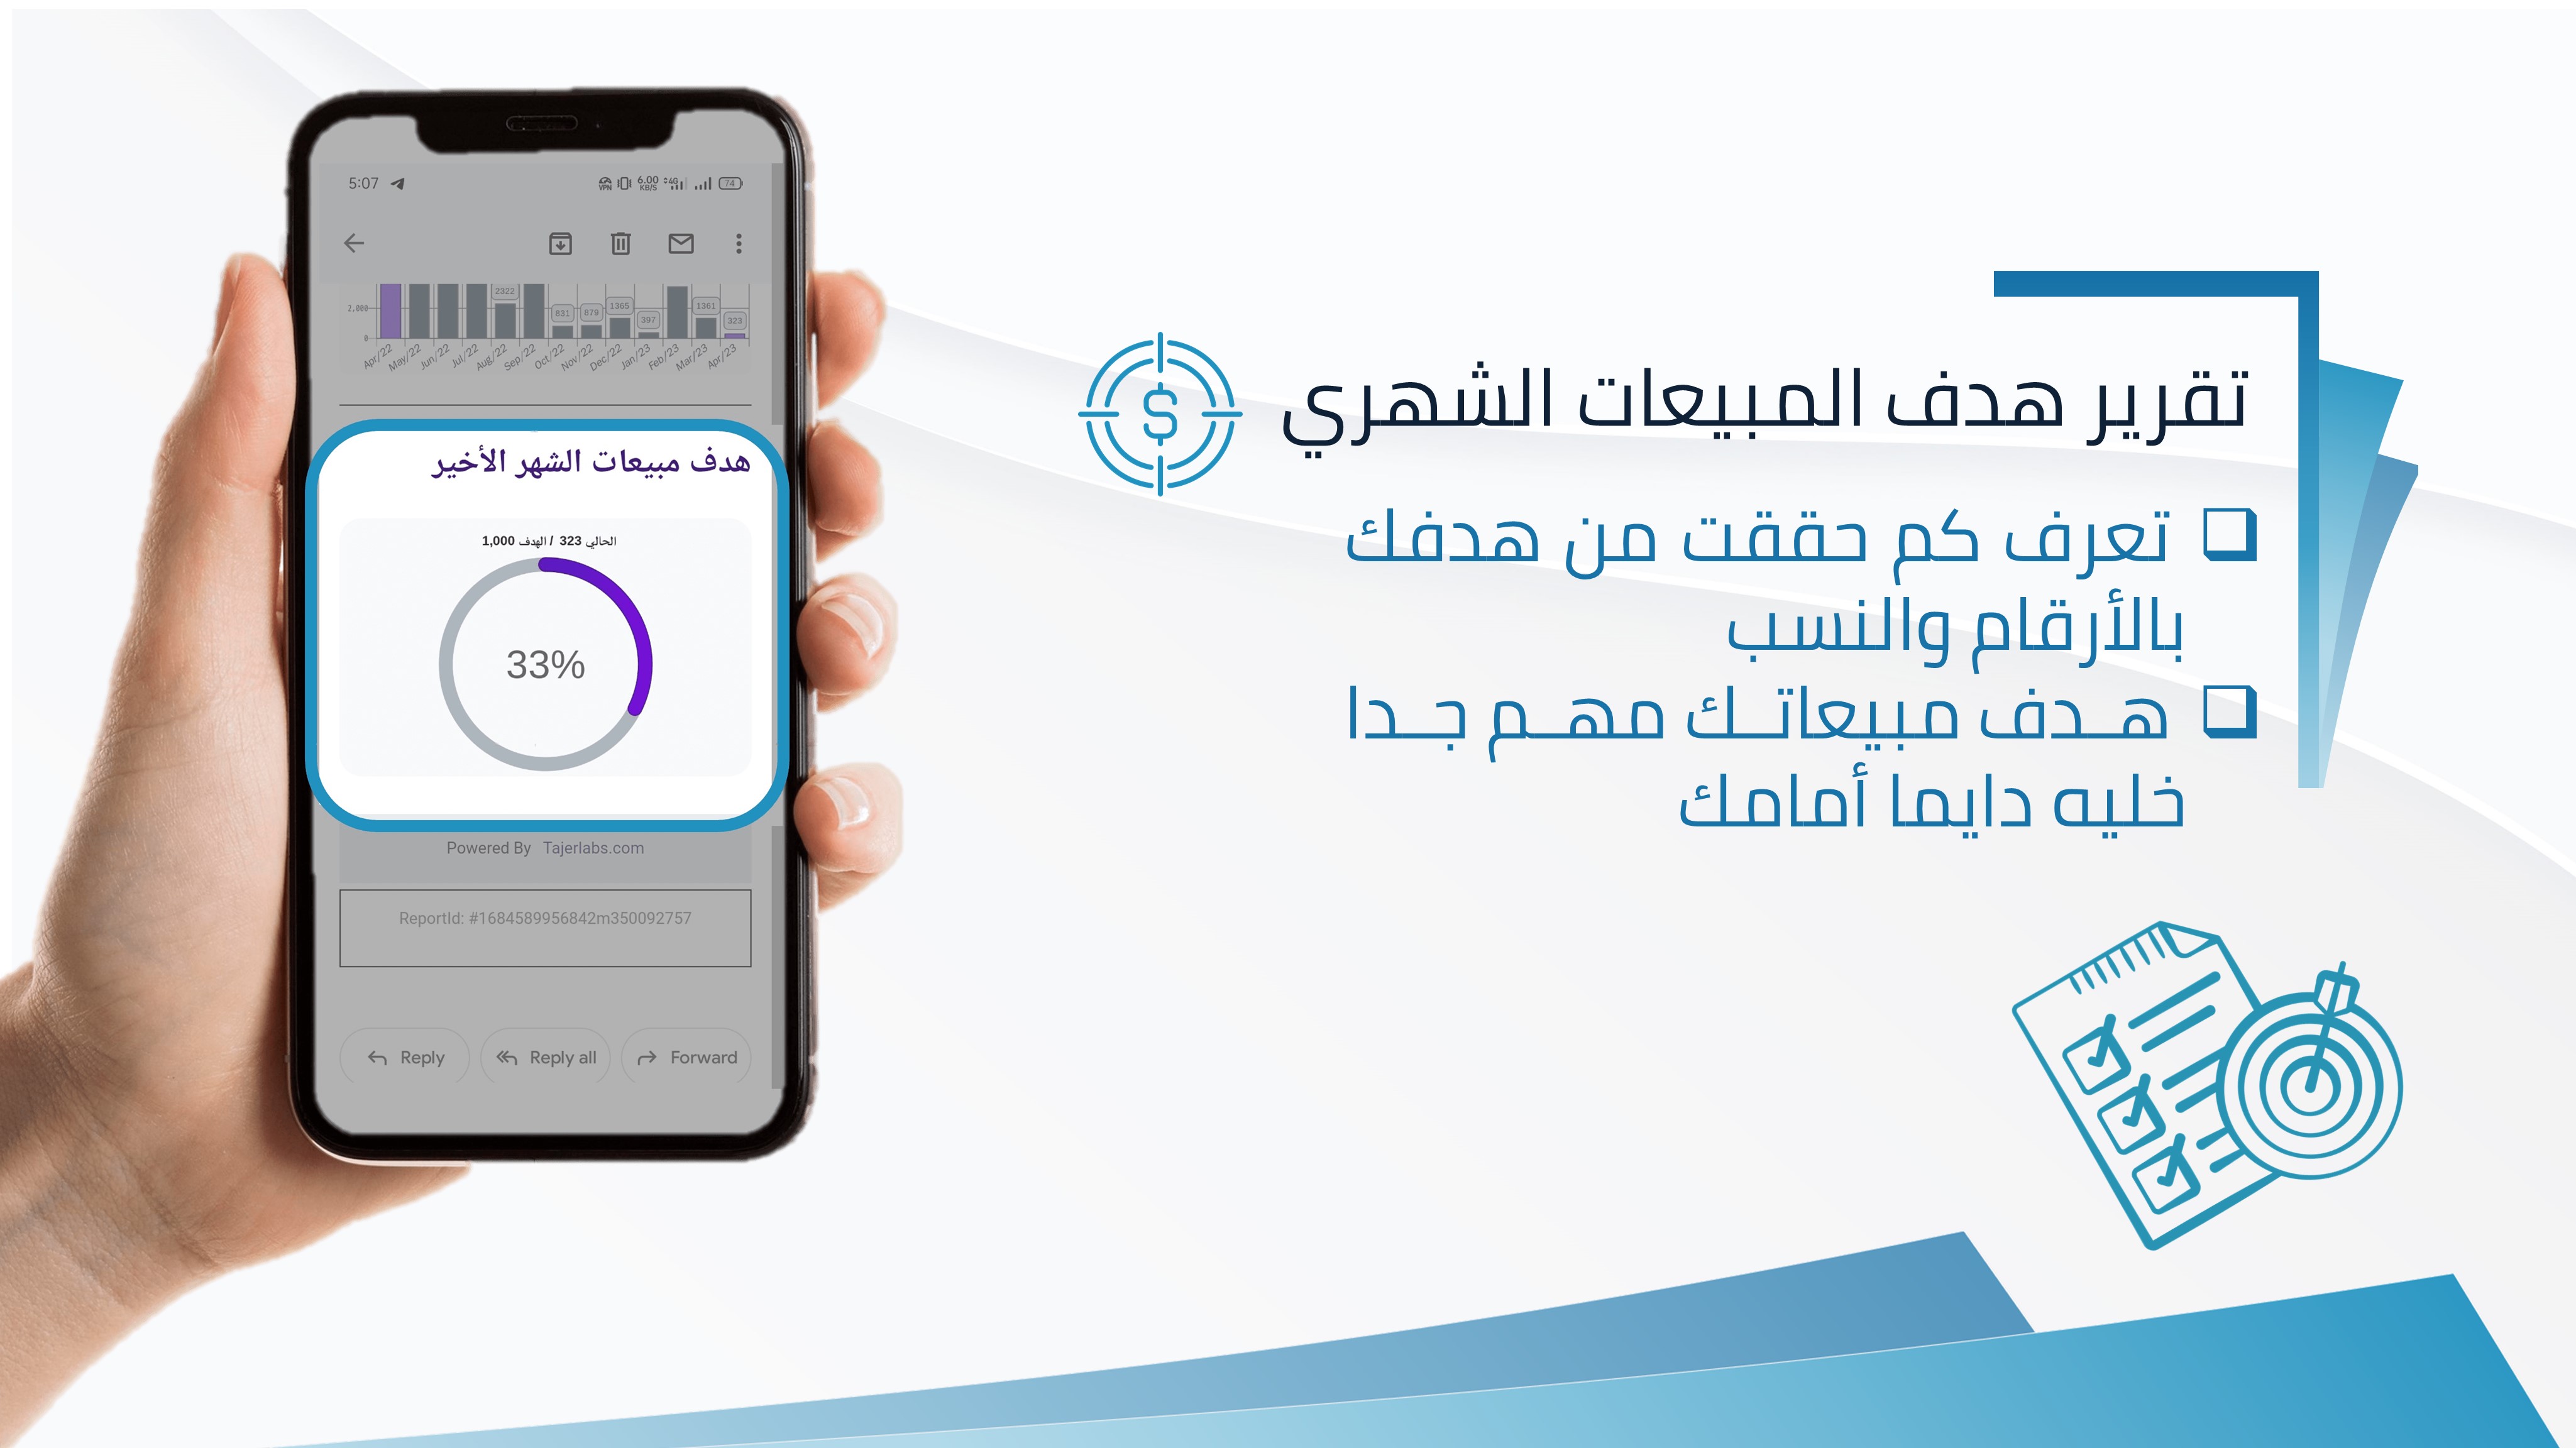 This app provides you with the most important performance indicators of your store regularly through email along with clearly displayed charts to help you understand changes in your store performance.